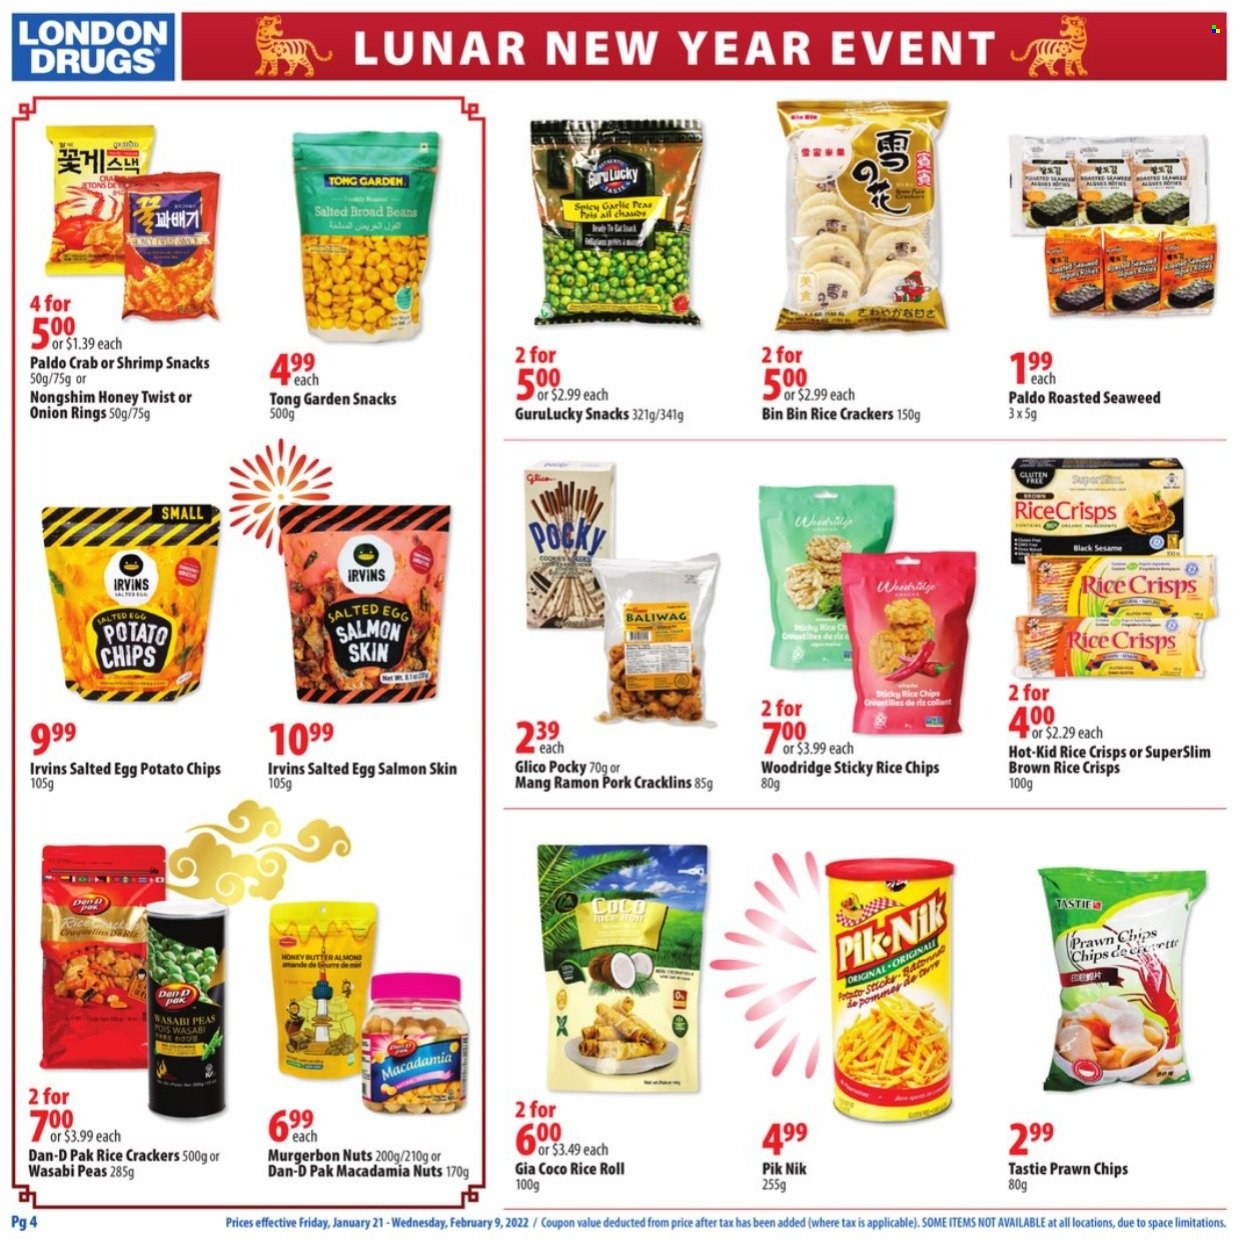 thumbnail - London Drugs Flyer - January 21, 2022 - February 09, 2022 - Sales products - crackers, potato chips, onion rings, salted egg, rice crackers, rice crisps, seaweed, salmon, peas, Dan-D Pak, brown rice, honey, macadamia nuts, bin, wasabi, chips. Page 4.